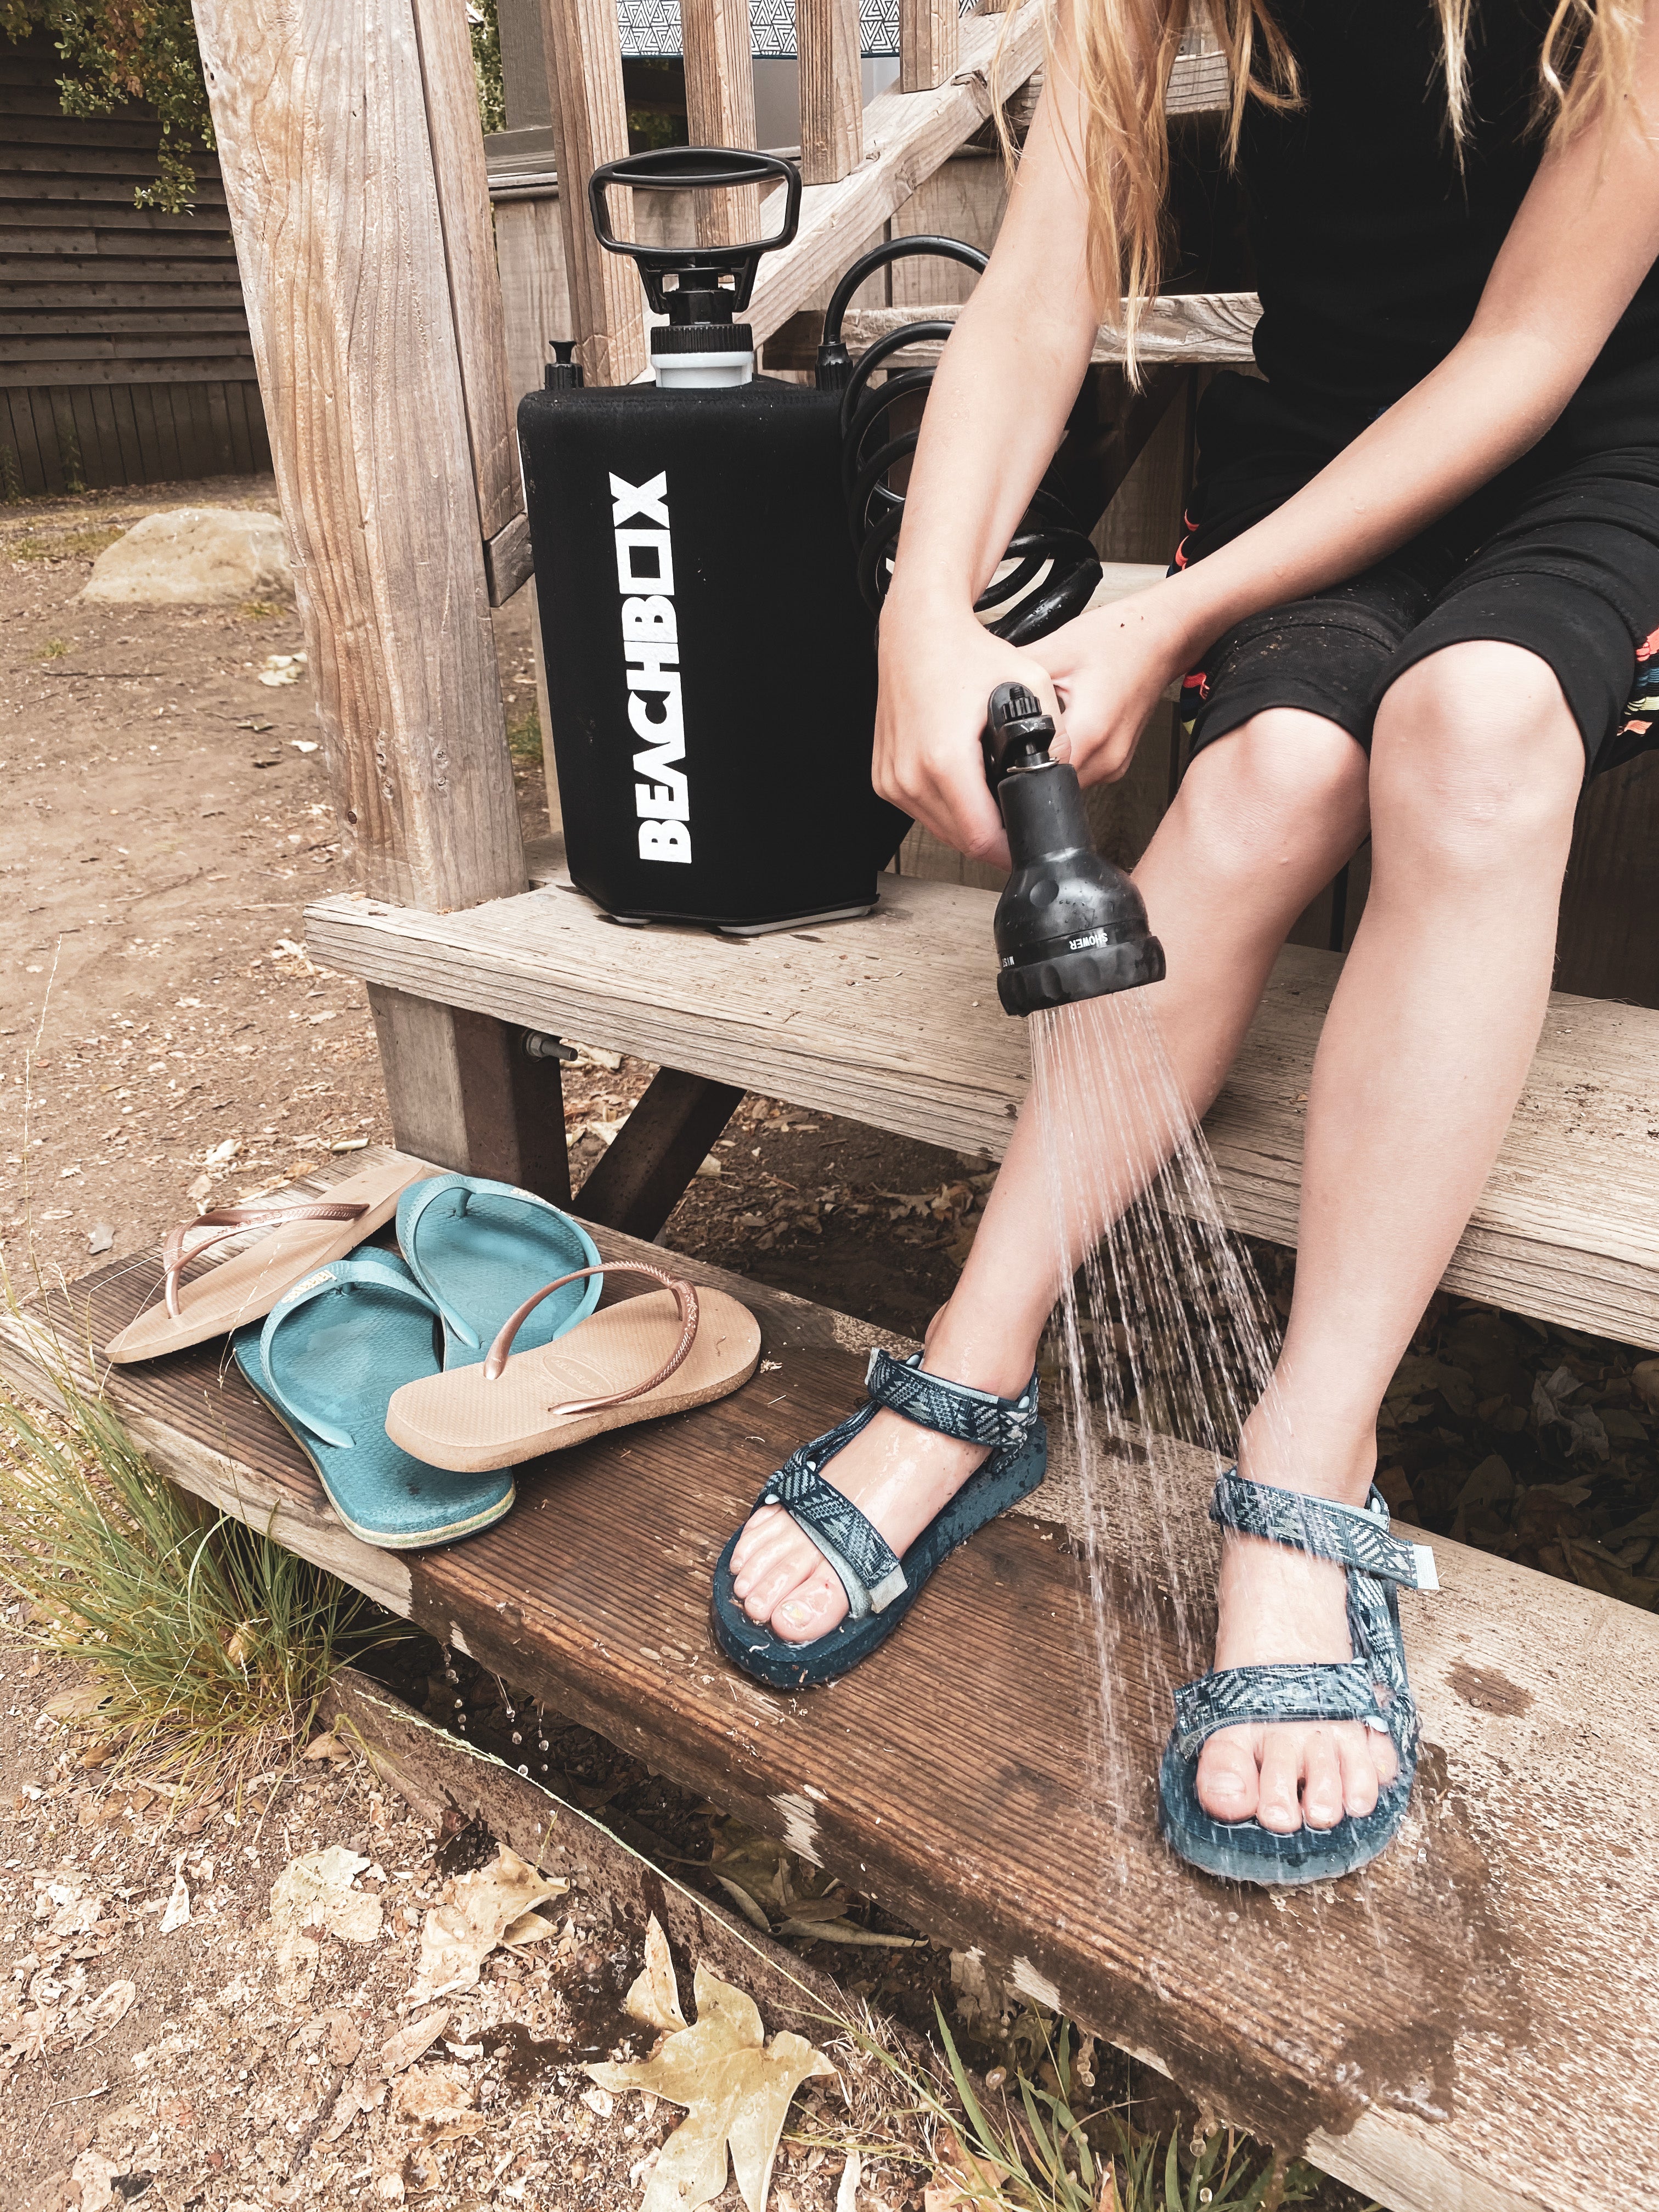 Why Should You Invest in a Camping Shower Water Tank?